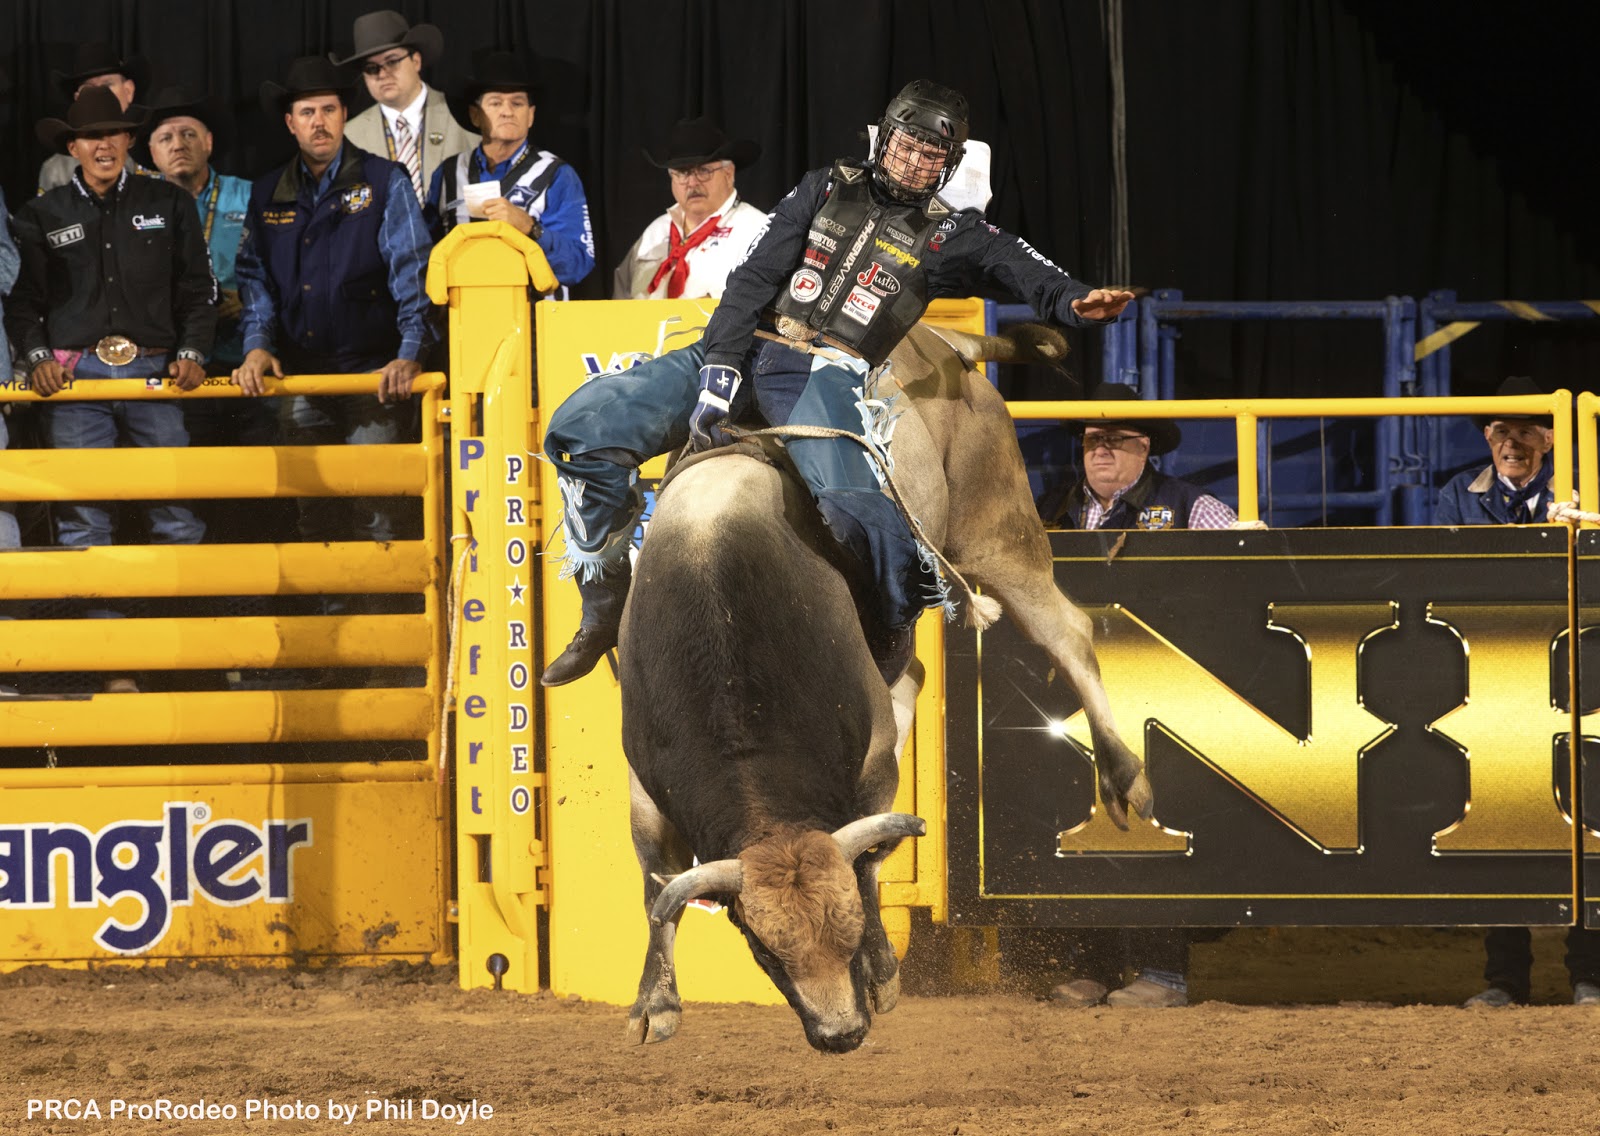 NFR round 2 Joe Frost clears 90 points on reride to win bull riding